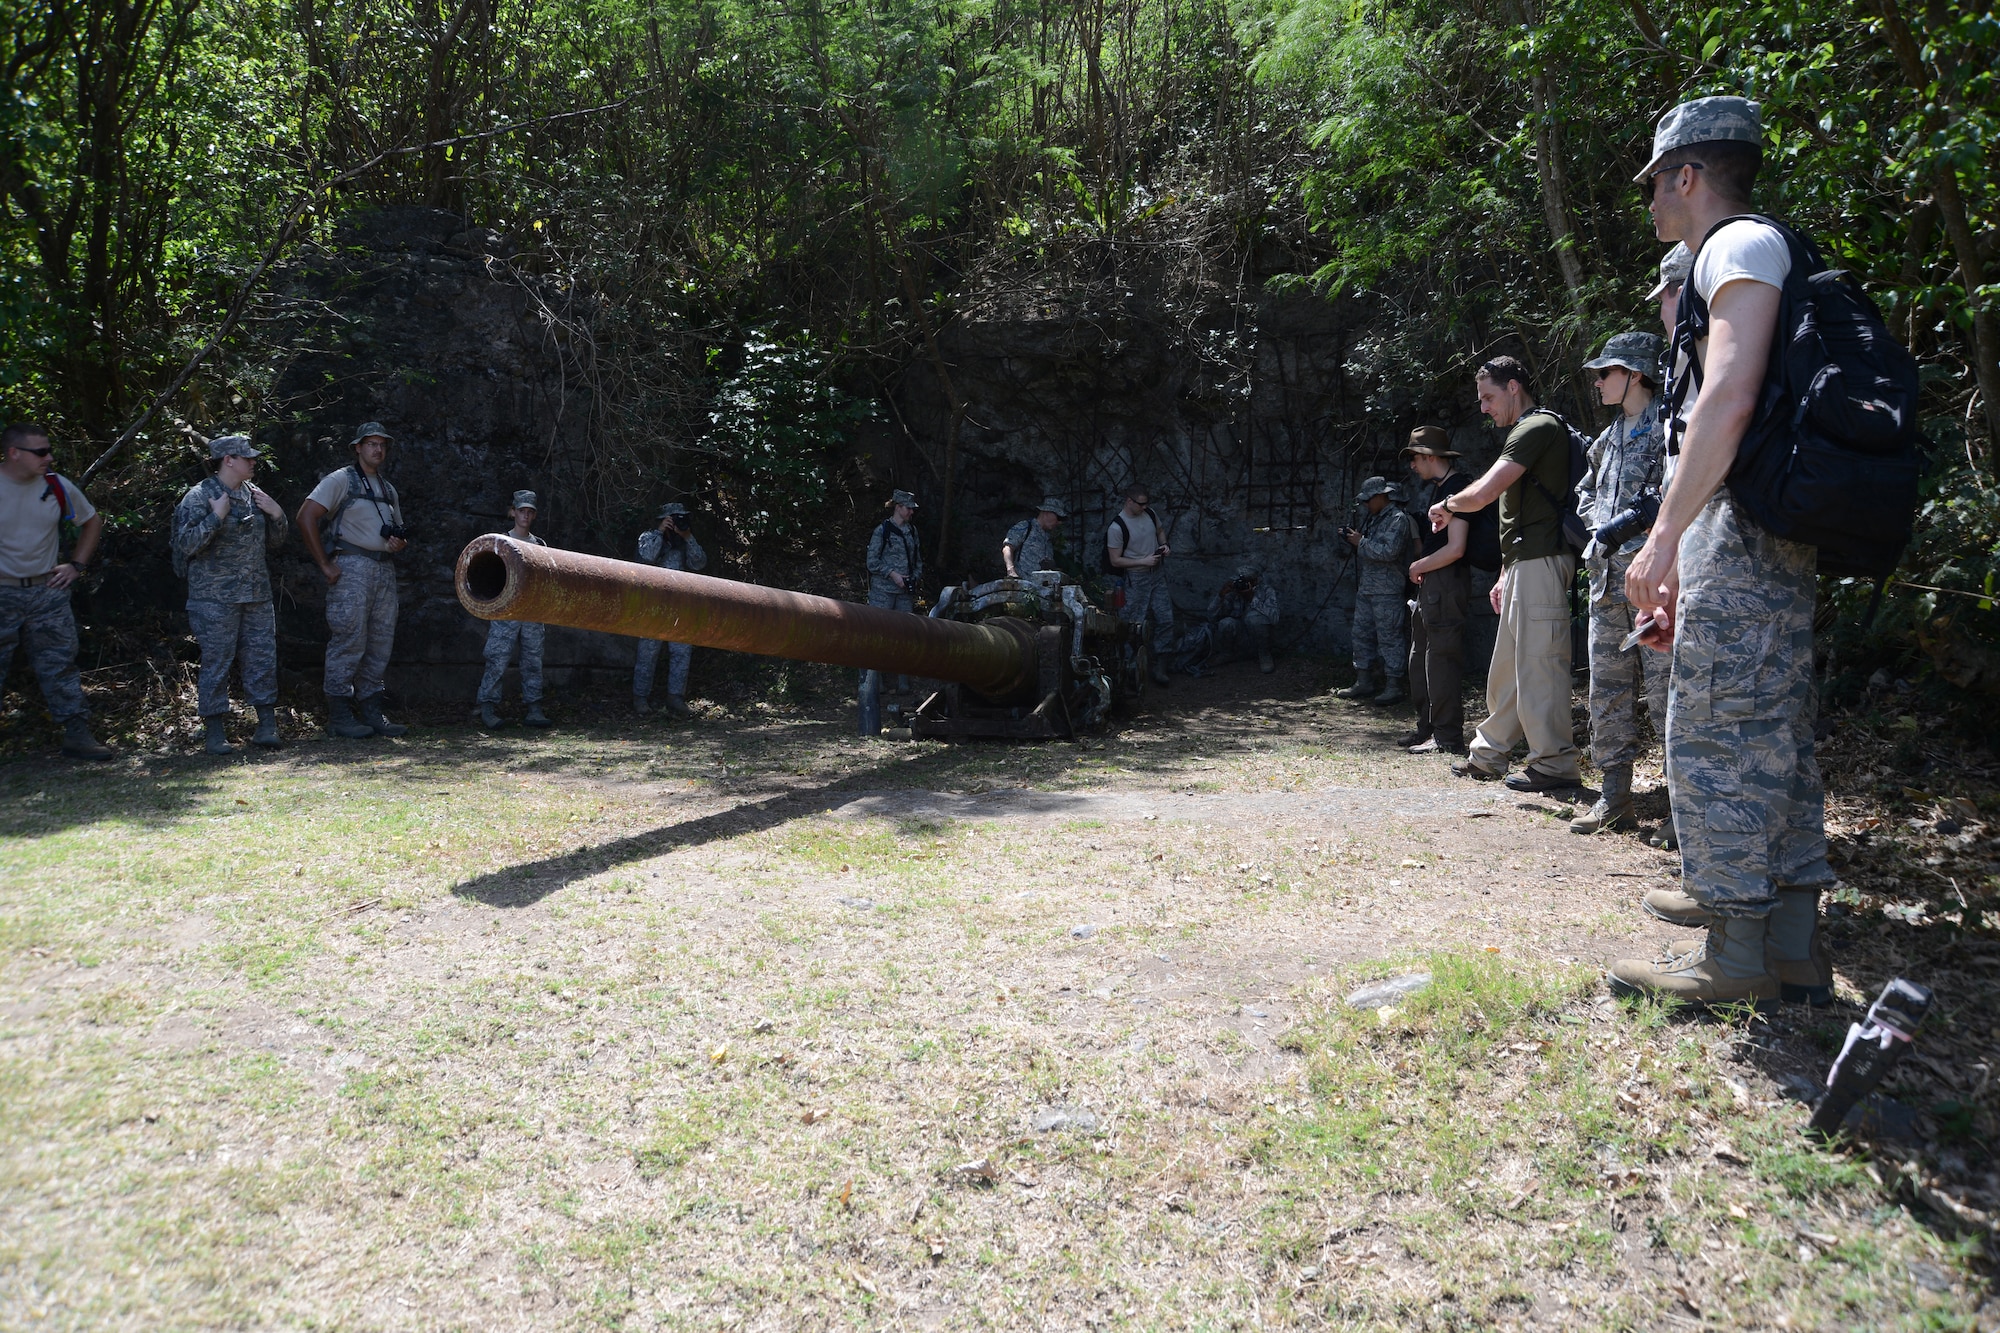 James D'Angina, 18th Wing historian, teaches members of the 18th Medical Group about Japanese artillery emplacement and a heavy Japanese naval gun during a professional development outing to Iwo To, Japan, formerly referred to as Iwo Jima, March 18, 2013. About 40 Airmen embarked on a hike to the top of Mount Suribachi on the island. (U.S. Air Force photo/Tech Sgt. Jocelyn L. Rich-Pendracki)